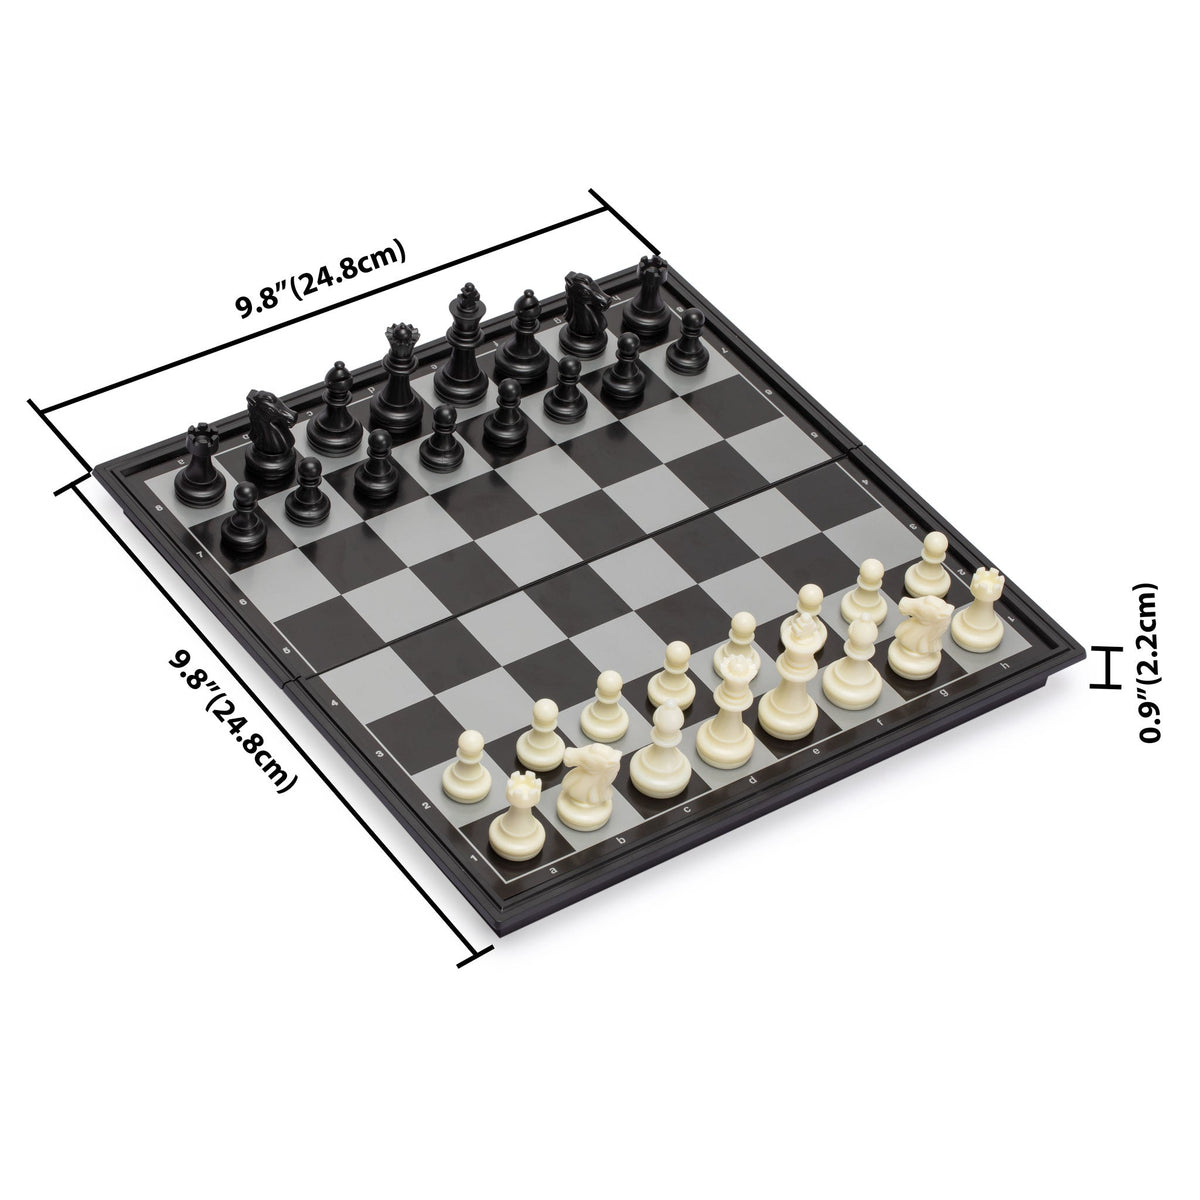 Magnetic Portable Medium Chess Board Game Set (9.8